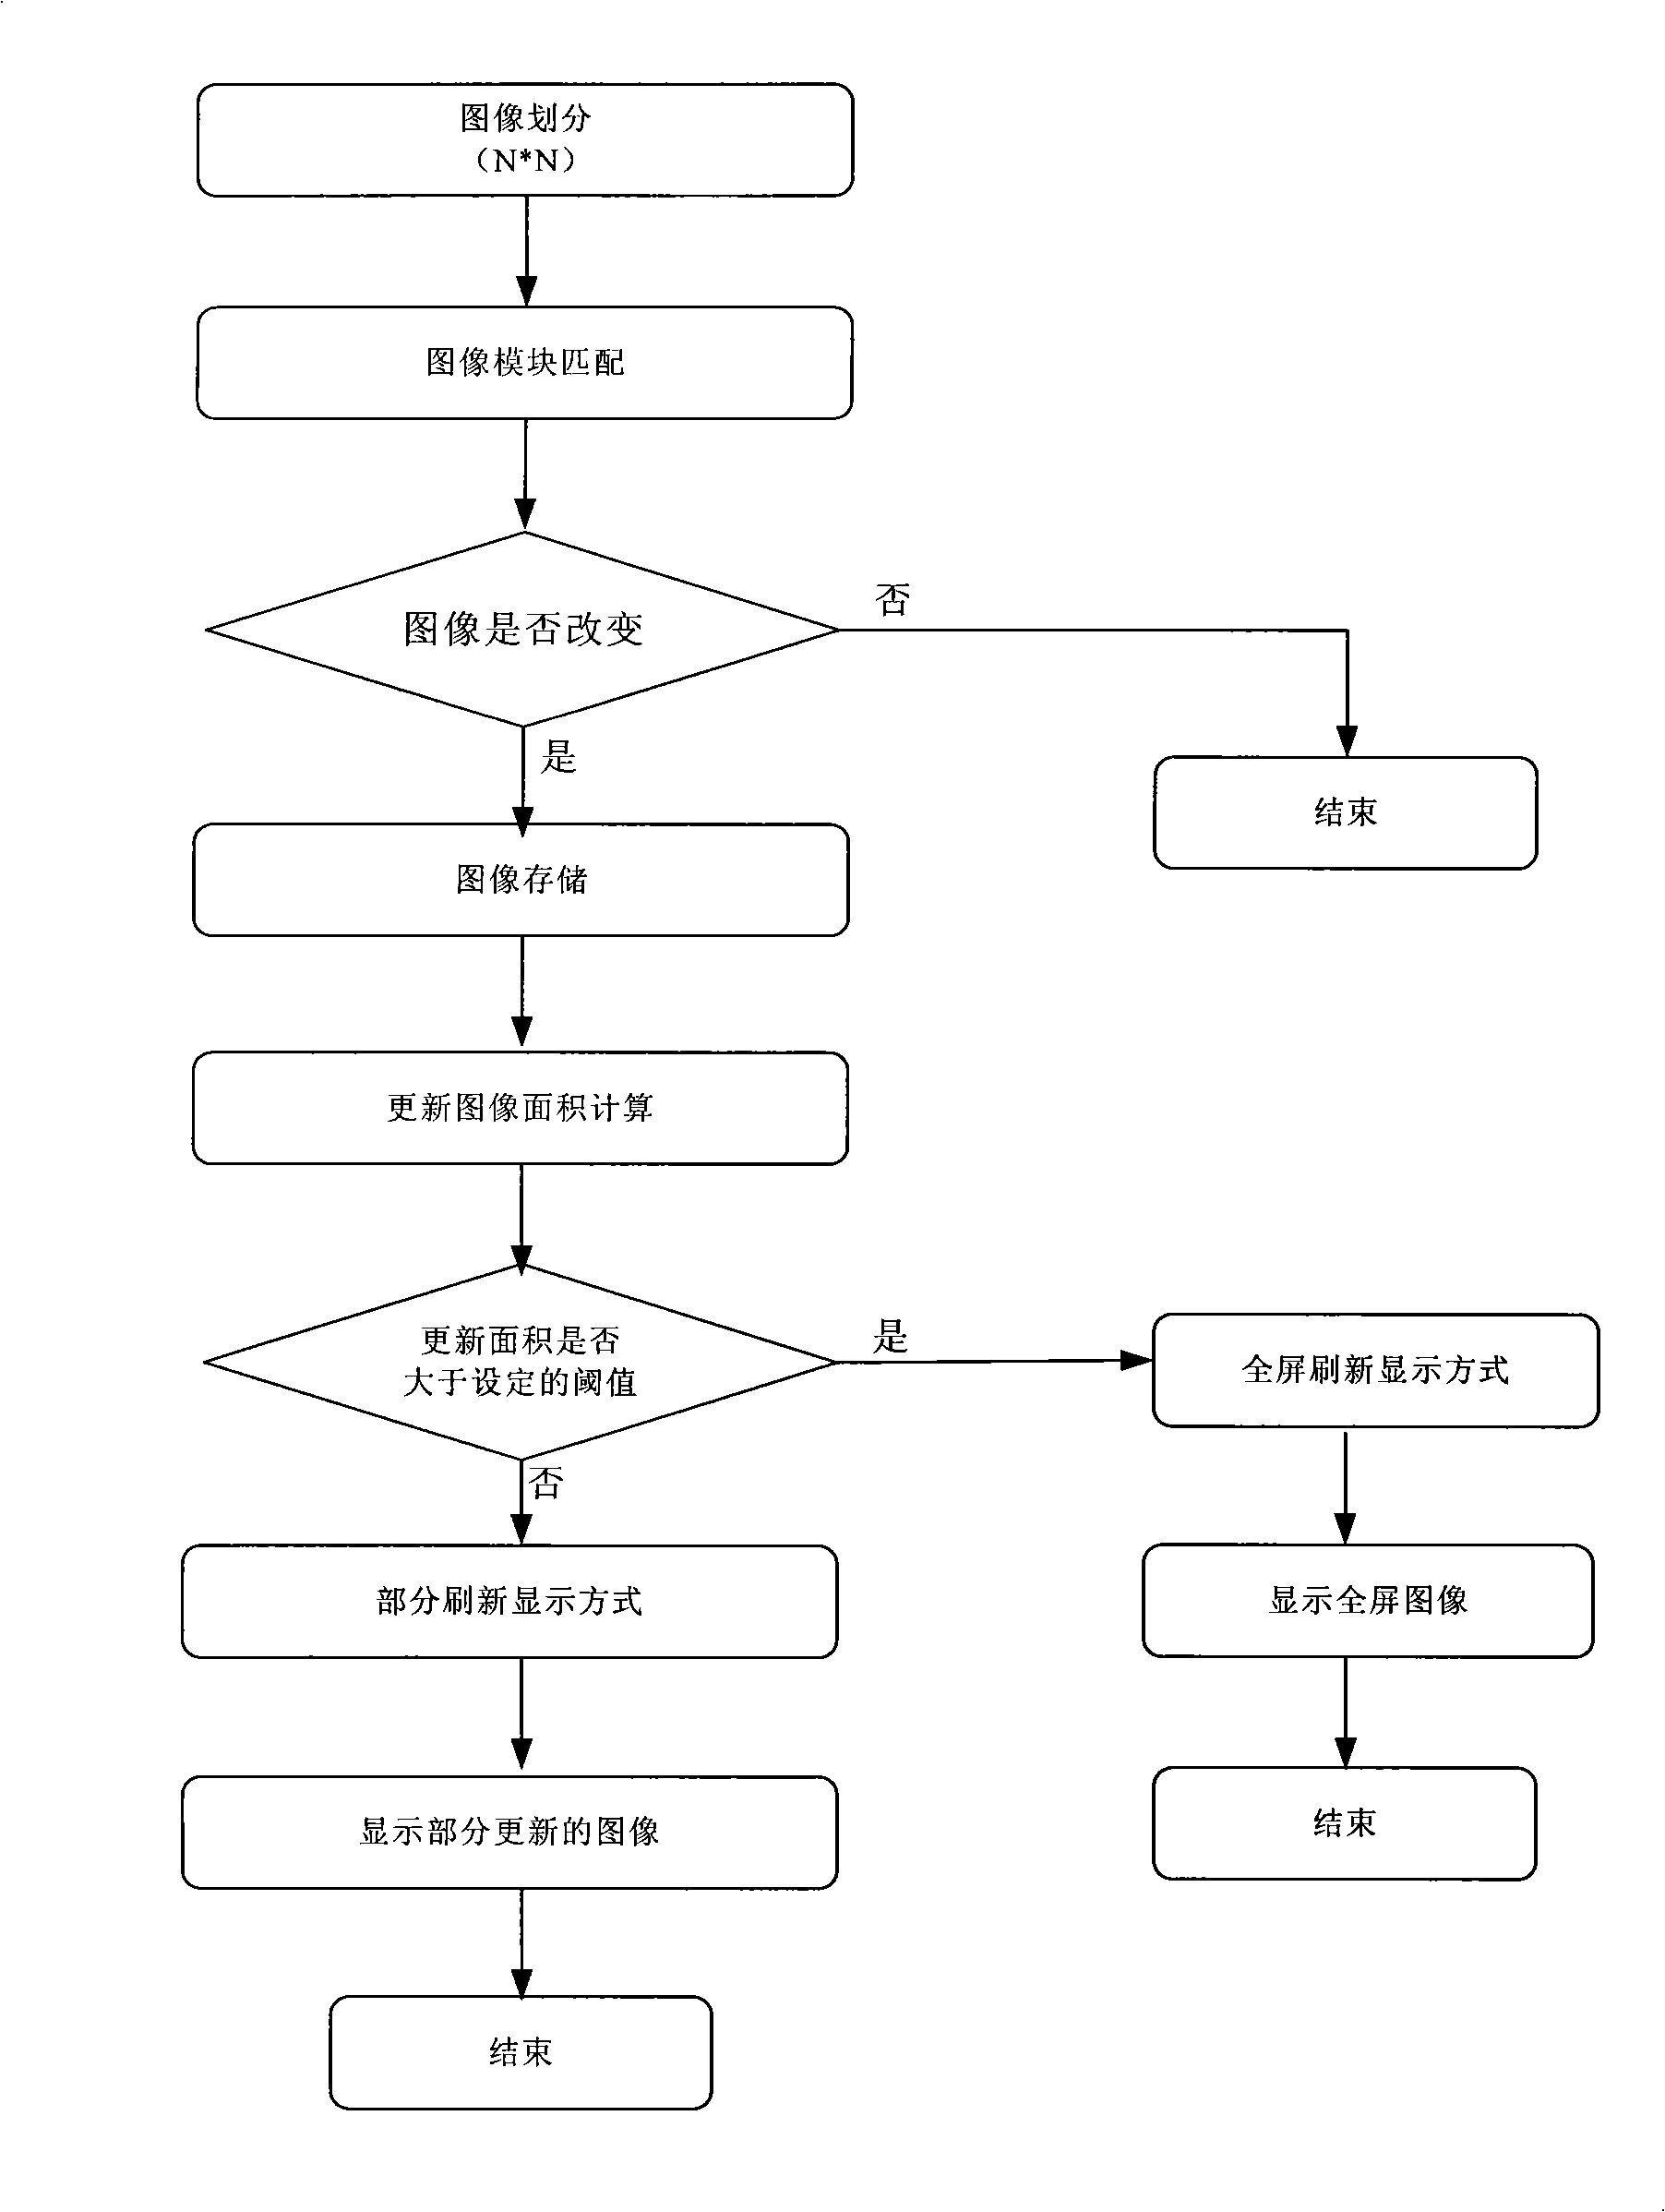 Image updating method of electronic paper screen